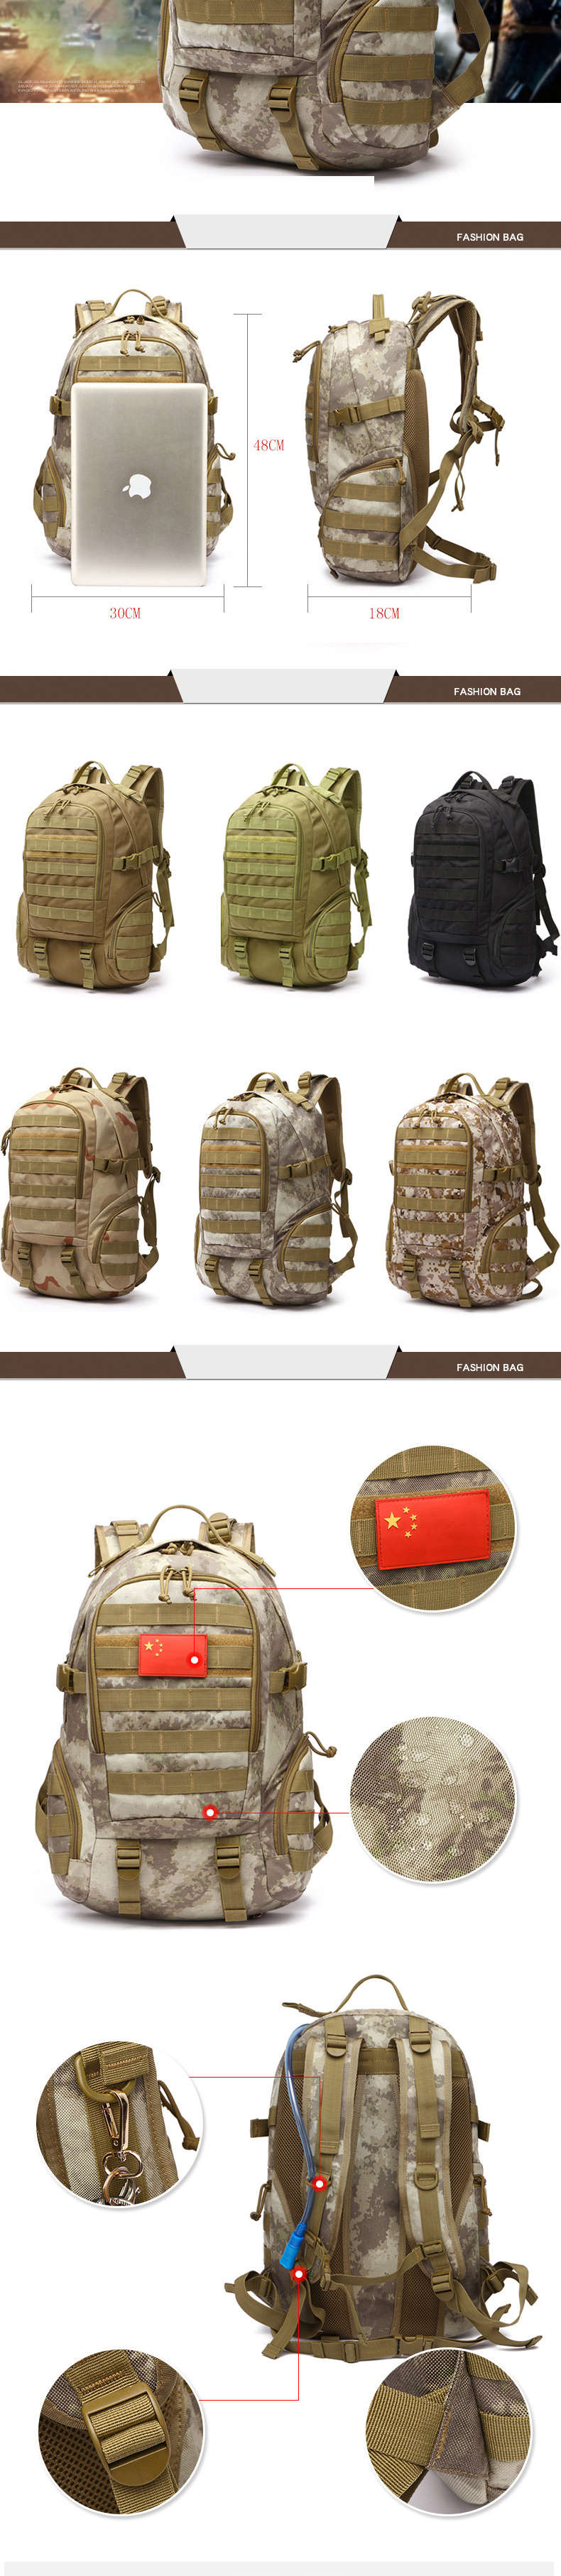 New Outdoor Mountaineering Backpack Professional Large Capacity Camouflage Mountaineering Bag